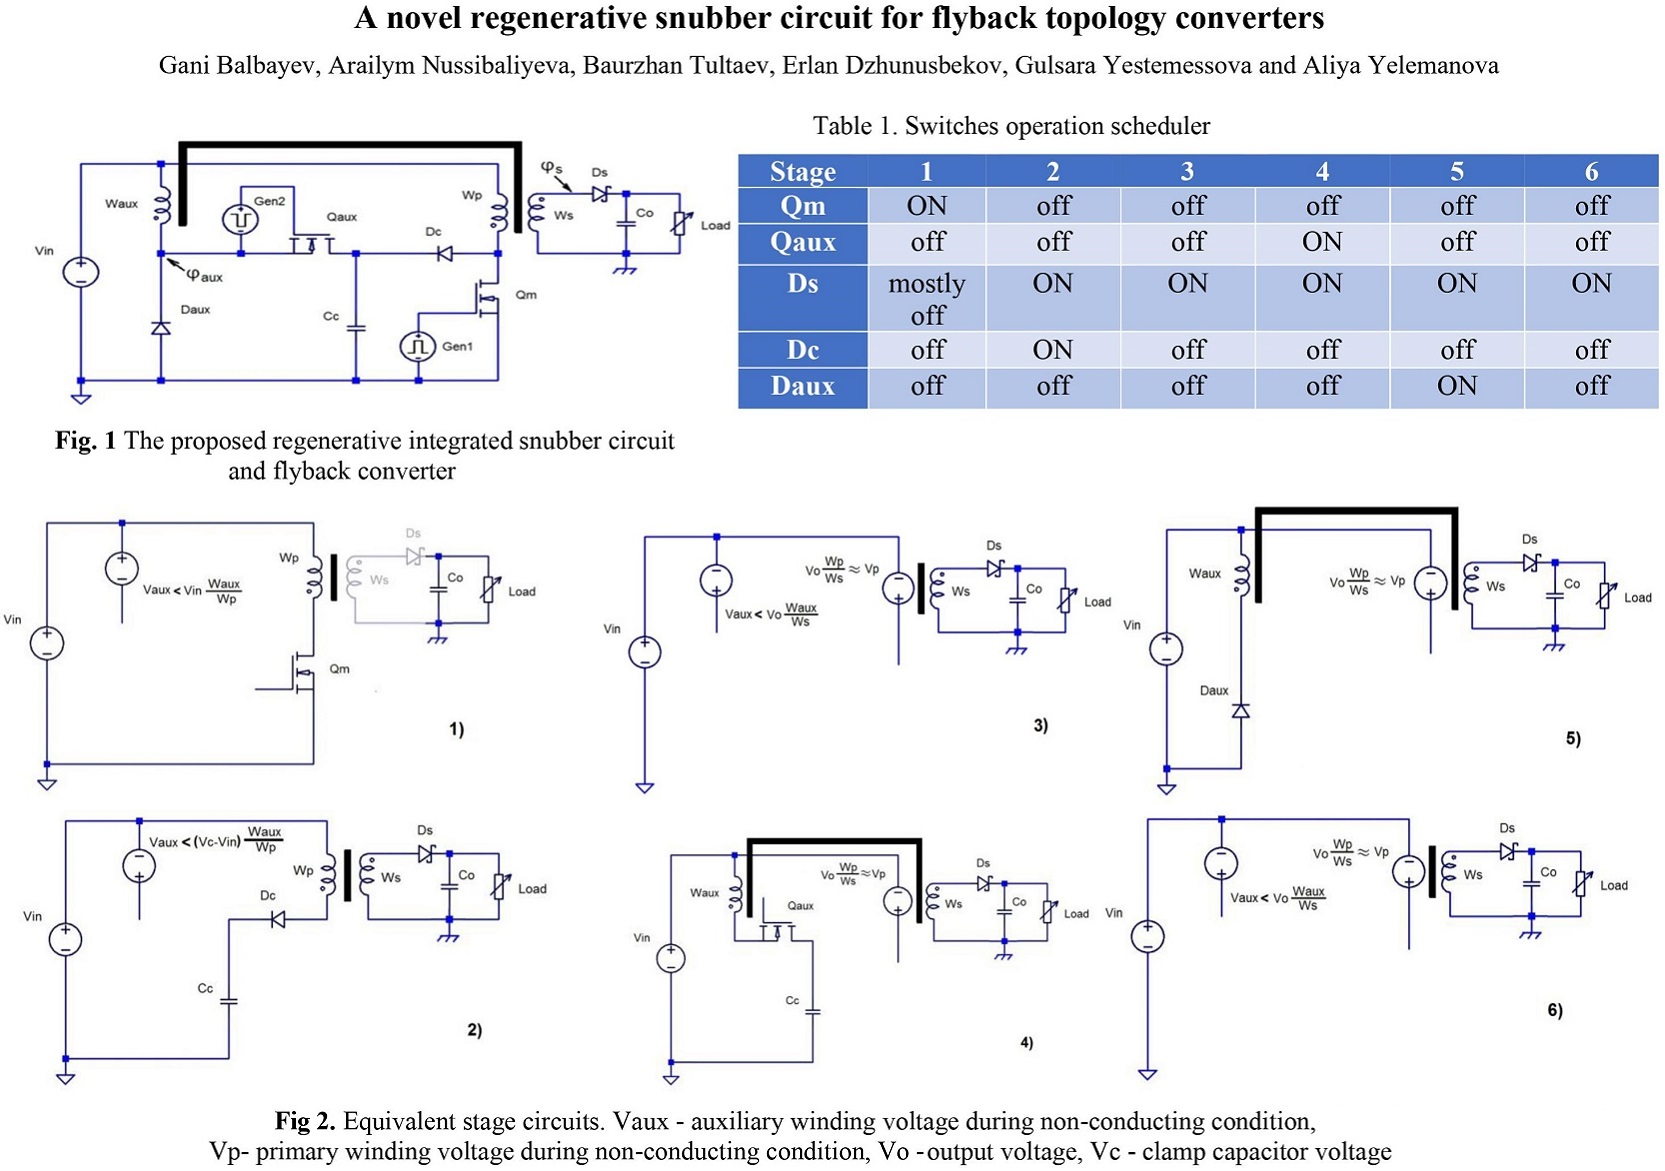 A novel regenerative snubber circuit for flyback topology converters